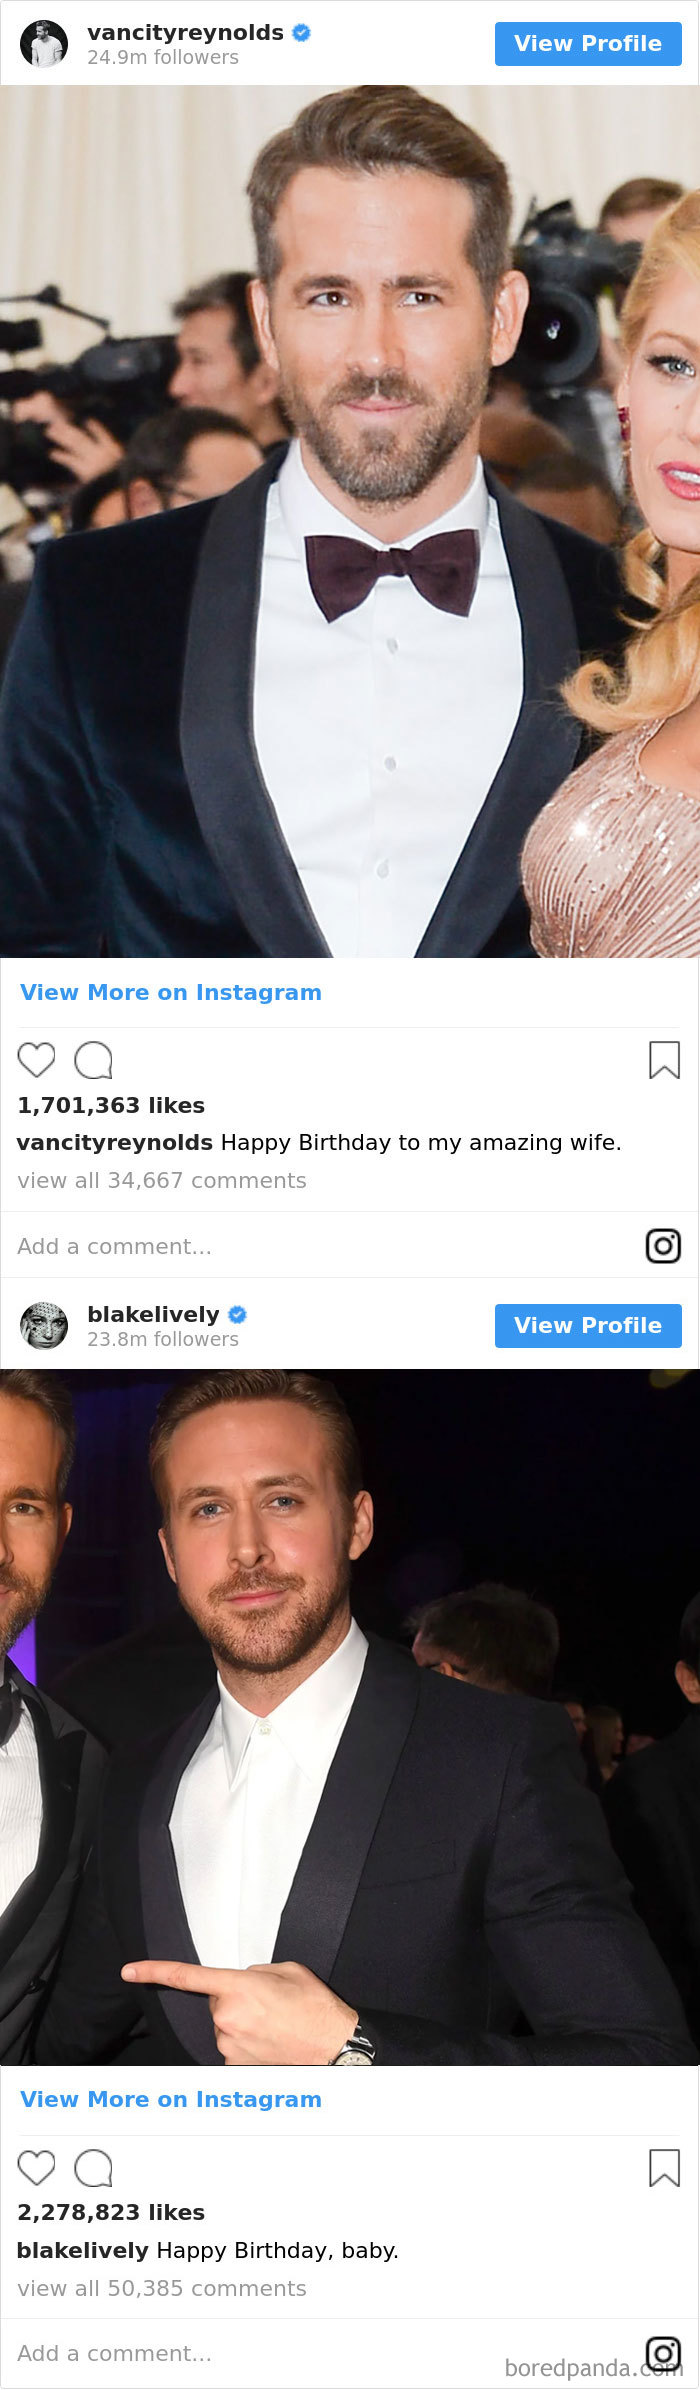 The Way He And His Wife Trolled Each Other Even On Birthdays